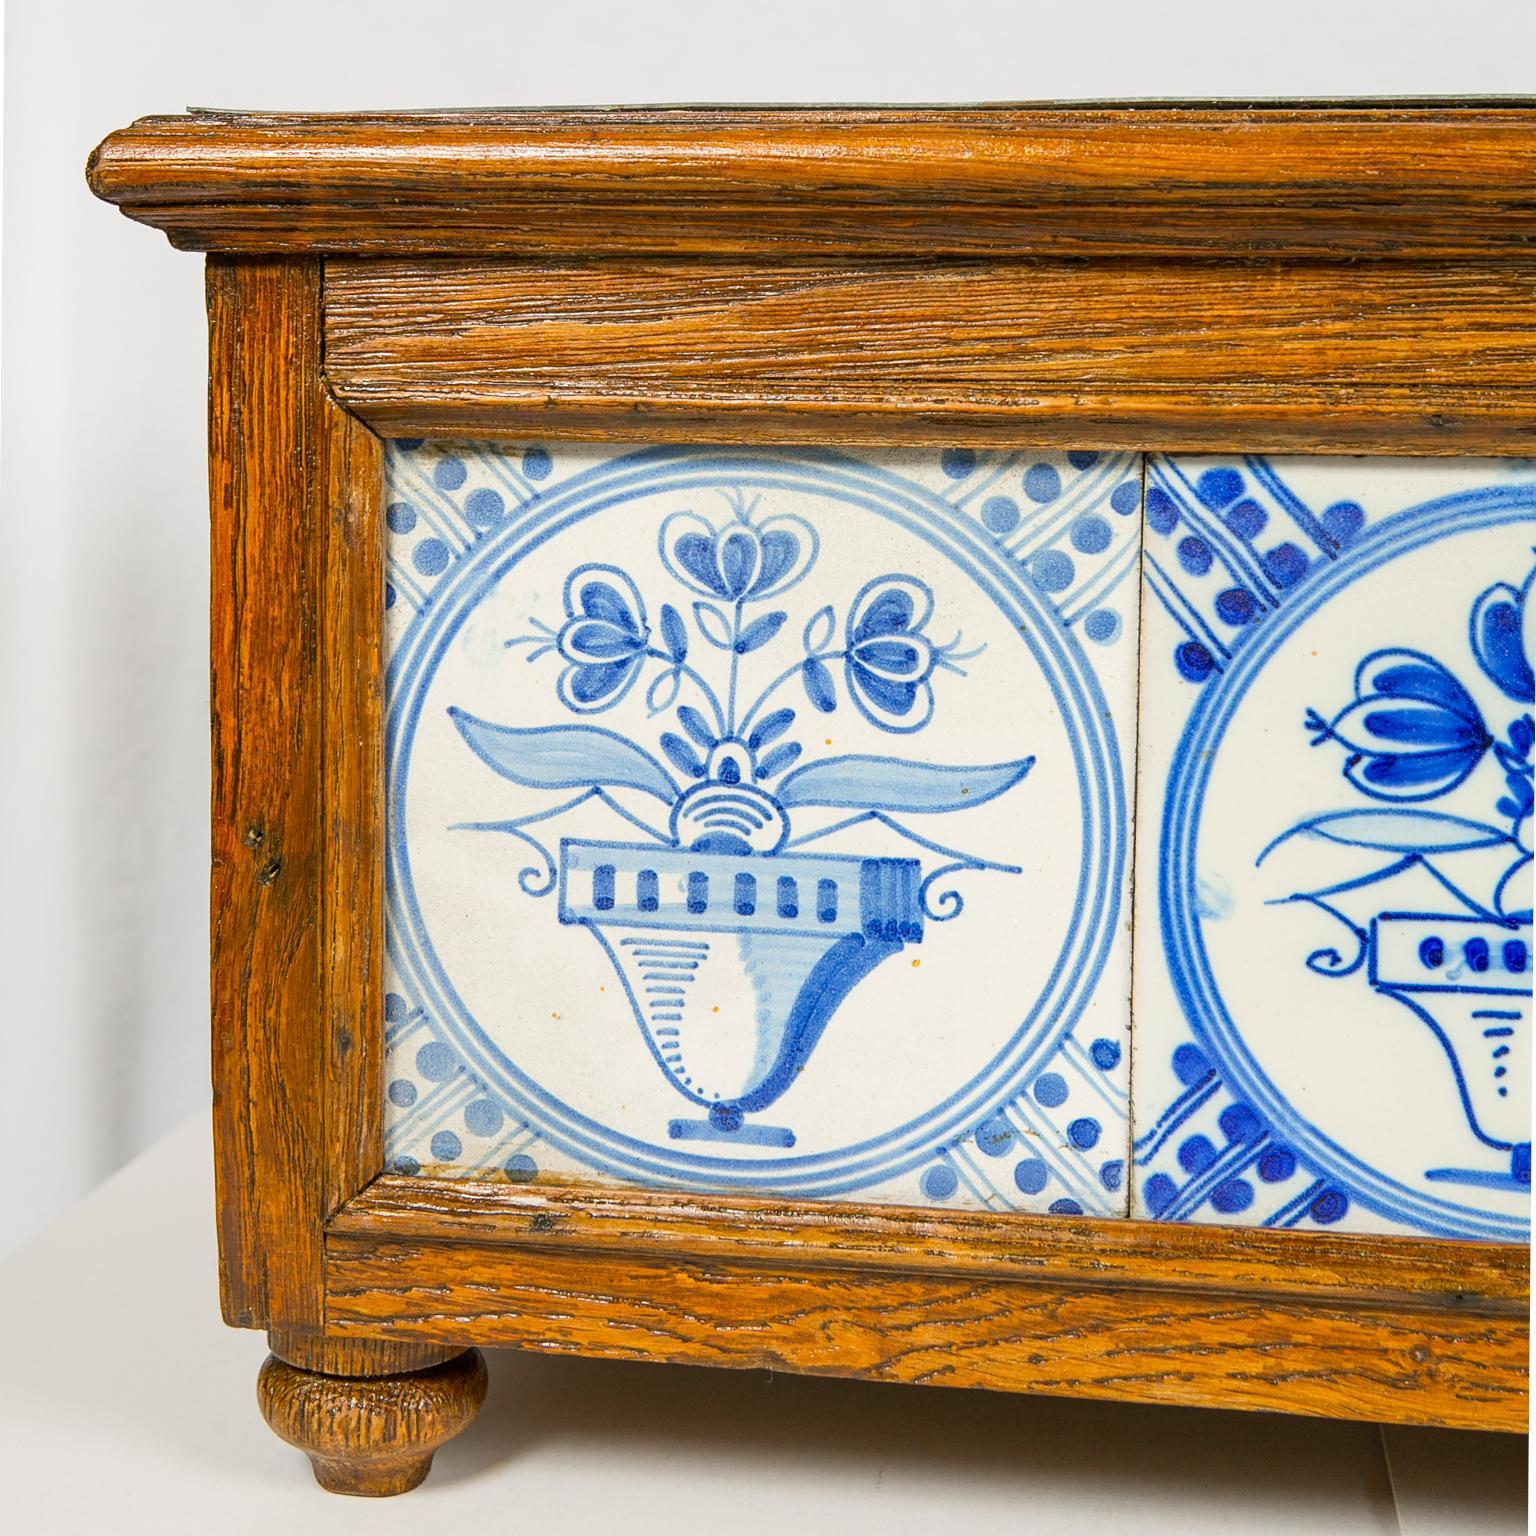 Hand-Painted Planter Decorated with Antique Tiles Delft Blue and White 18th Century